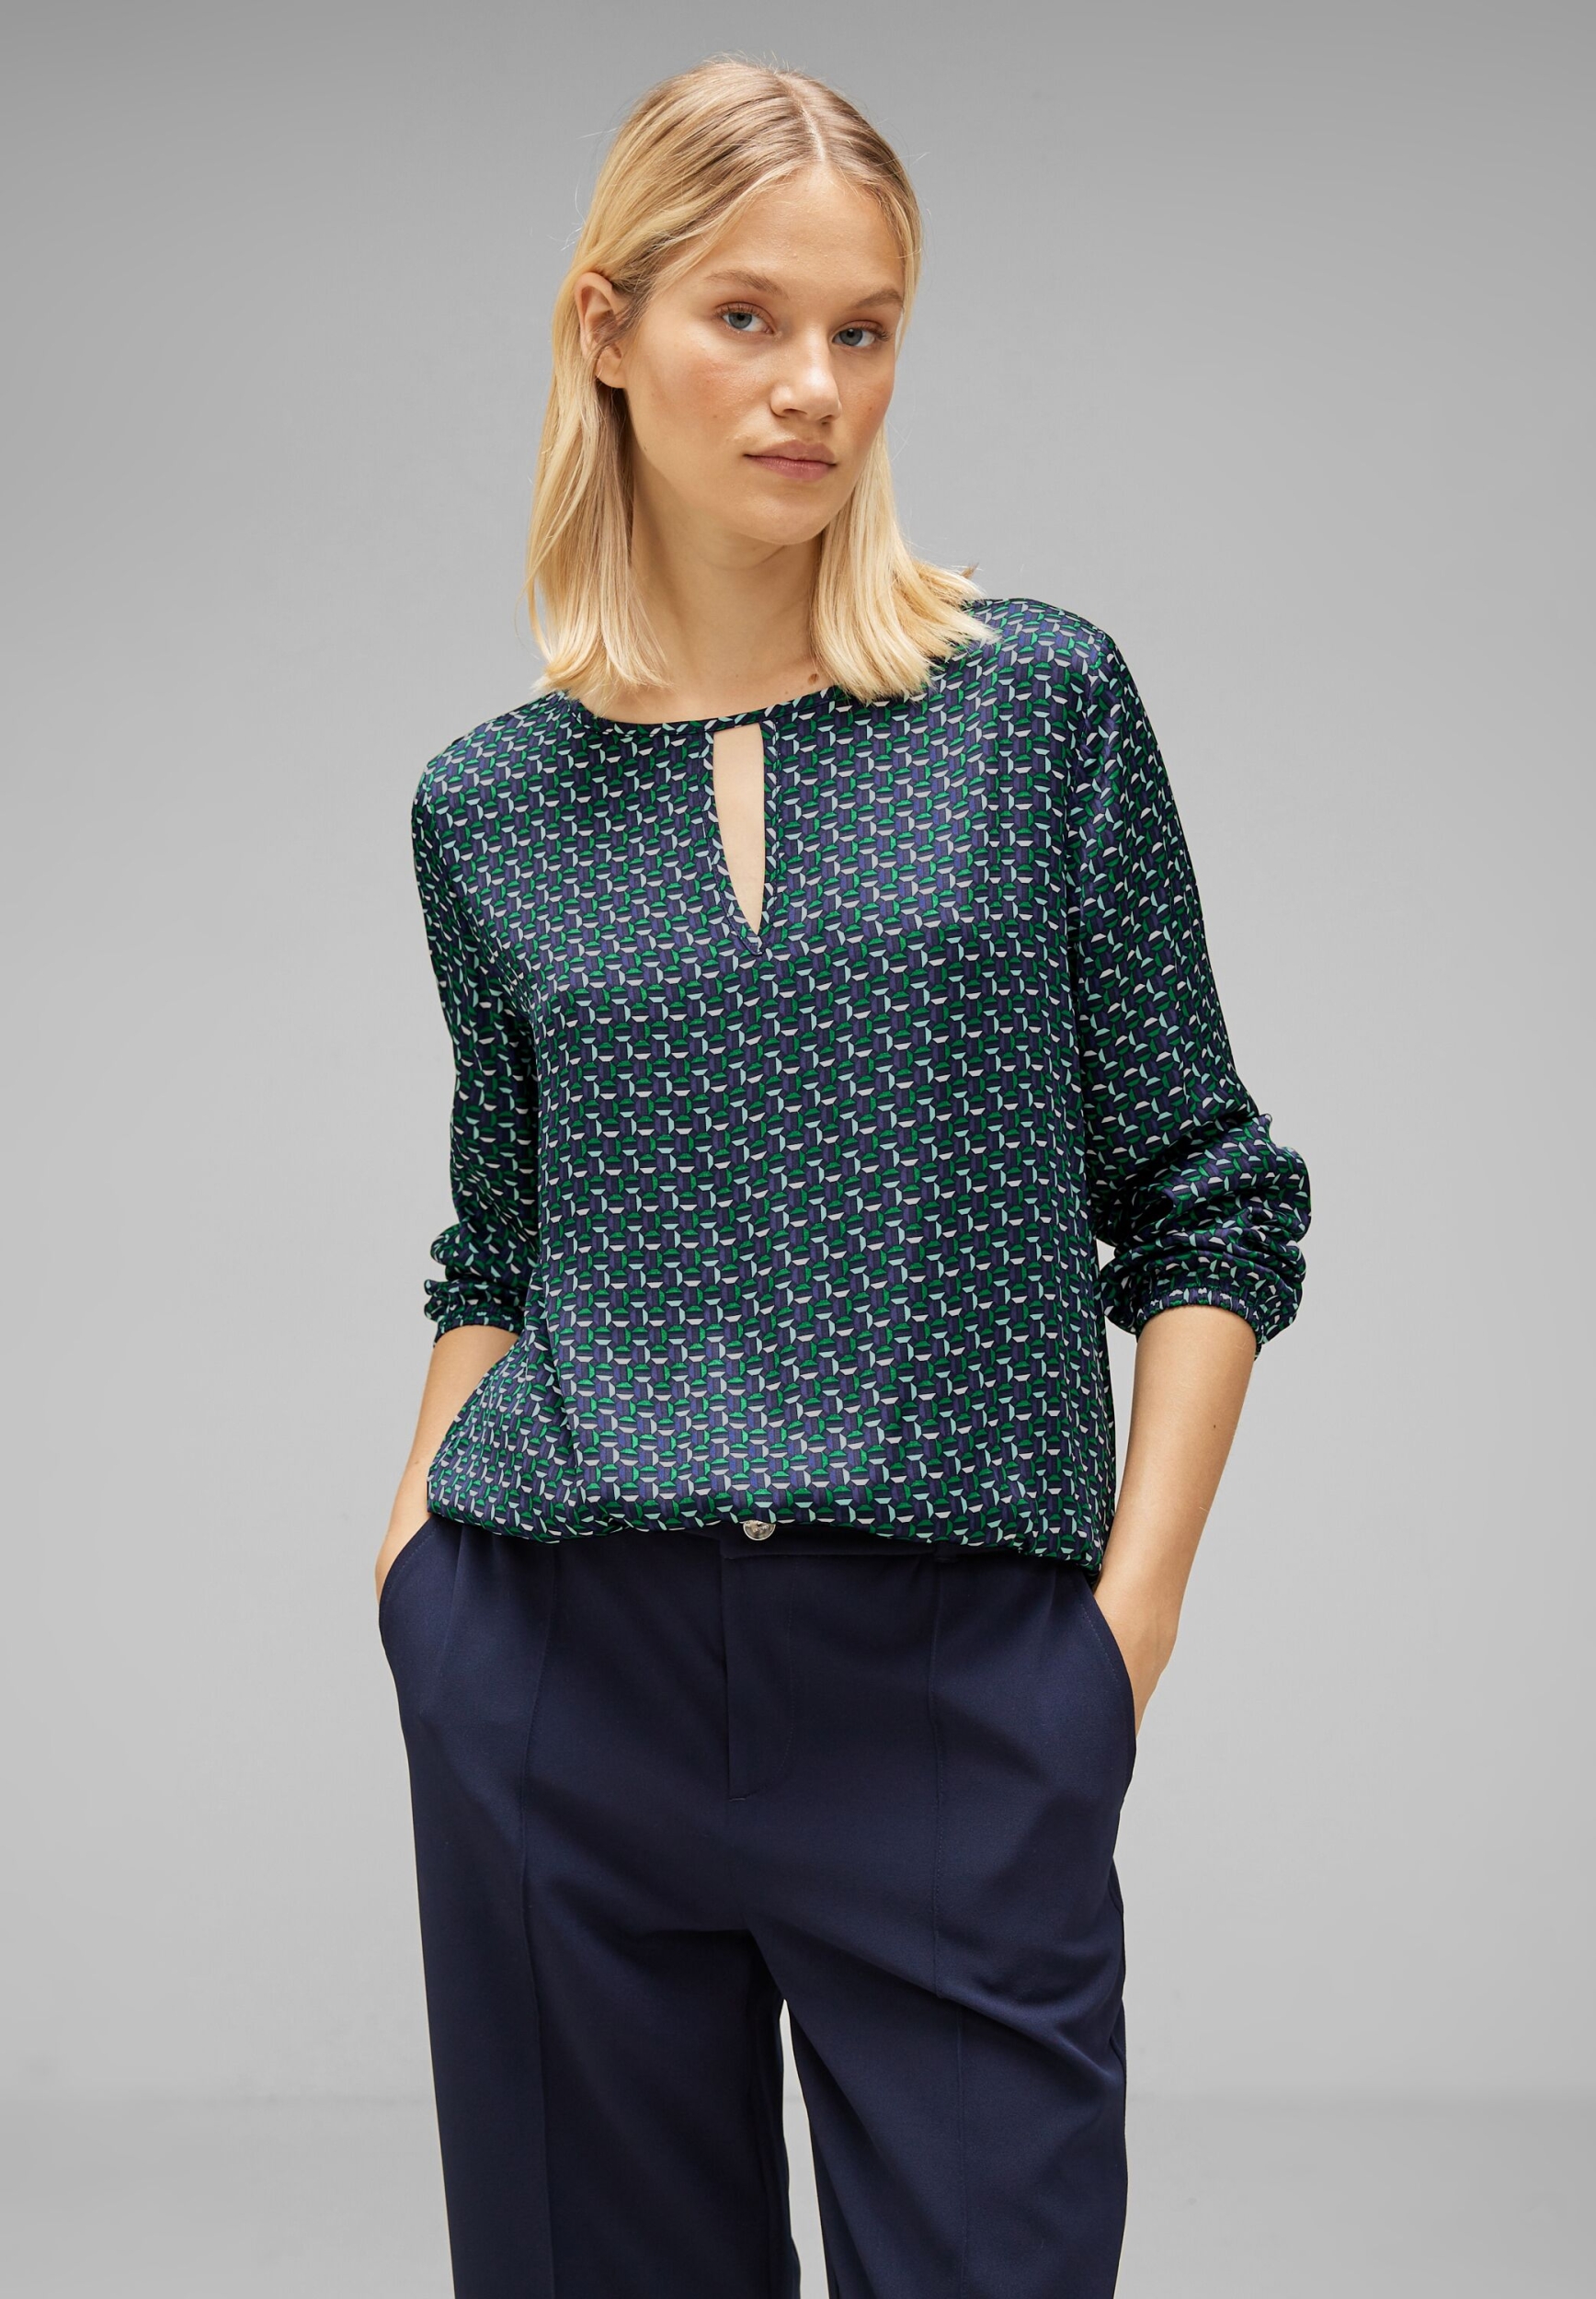 green Printed | A344194-35245-40 | cut 40 | out gentle w satinblouse